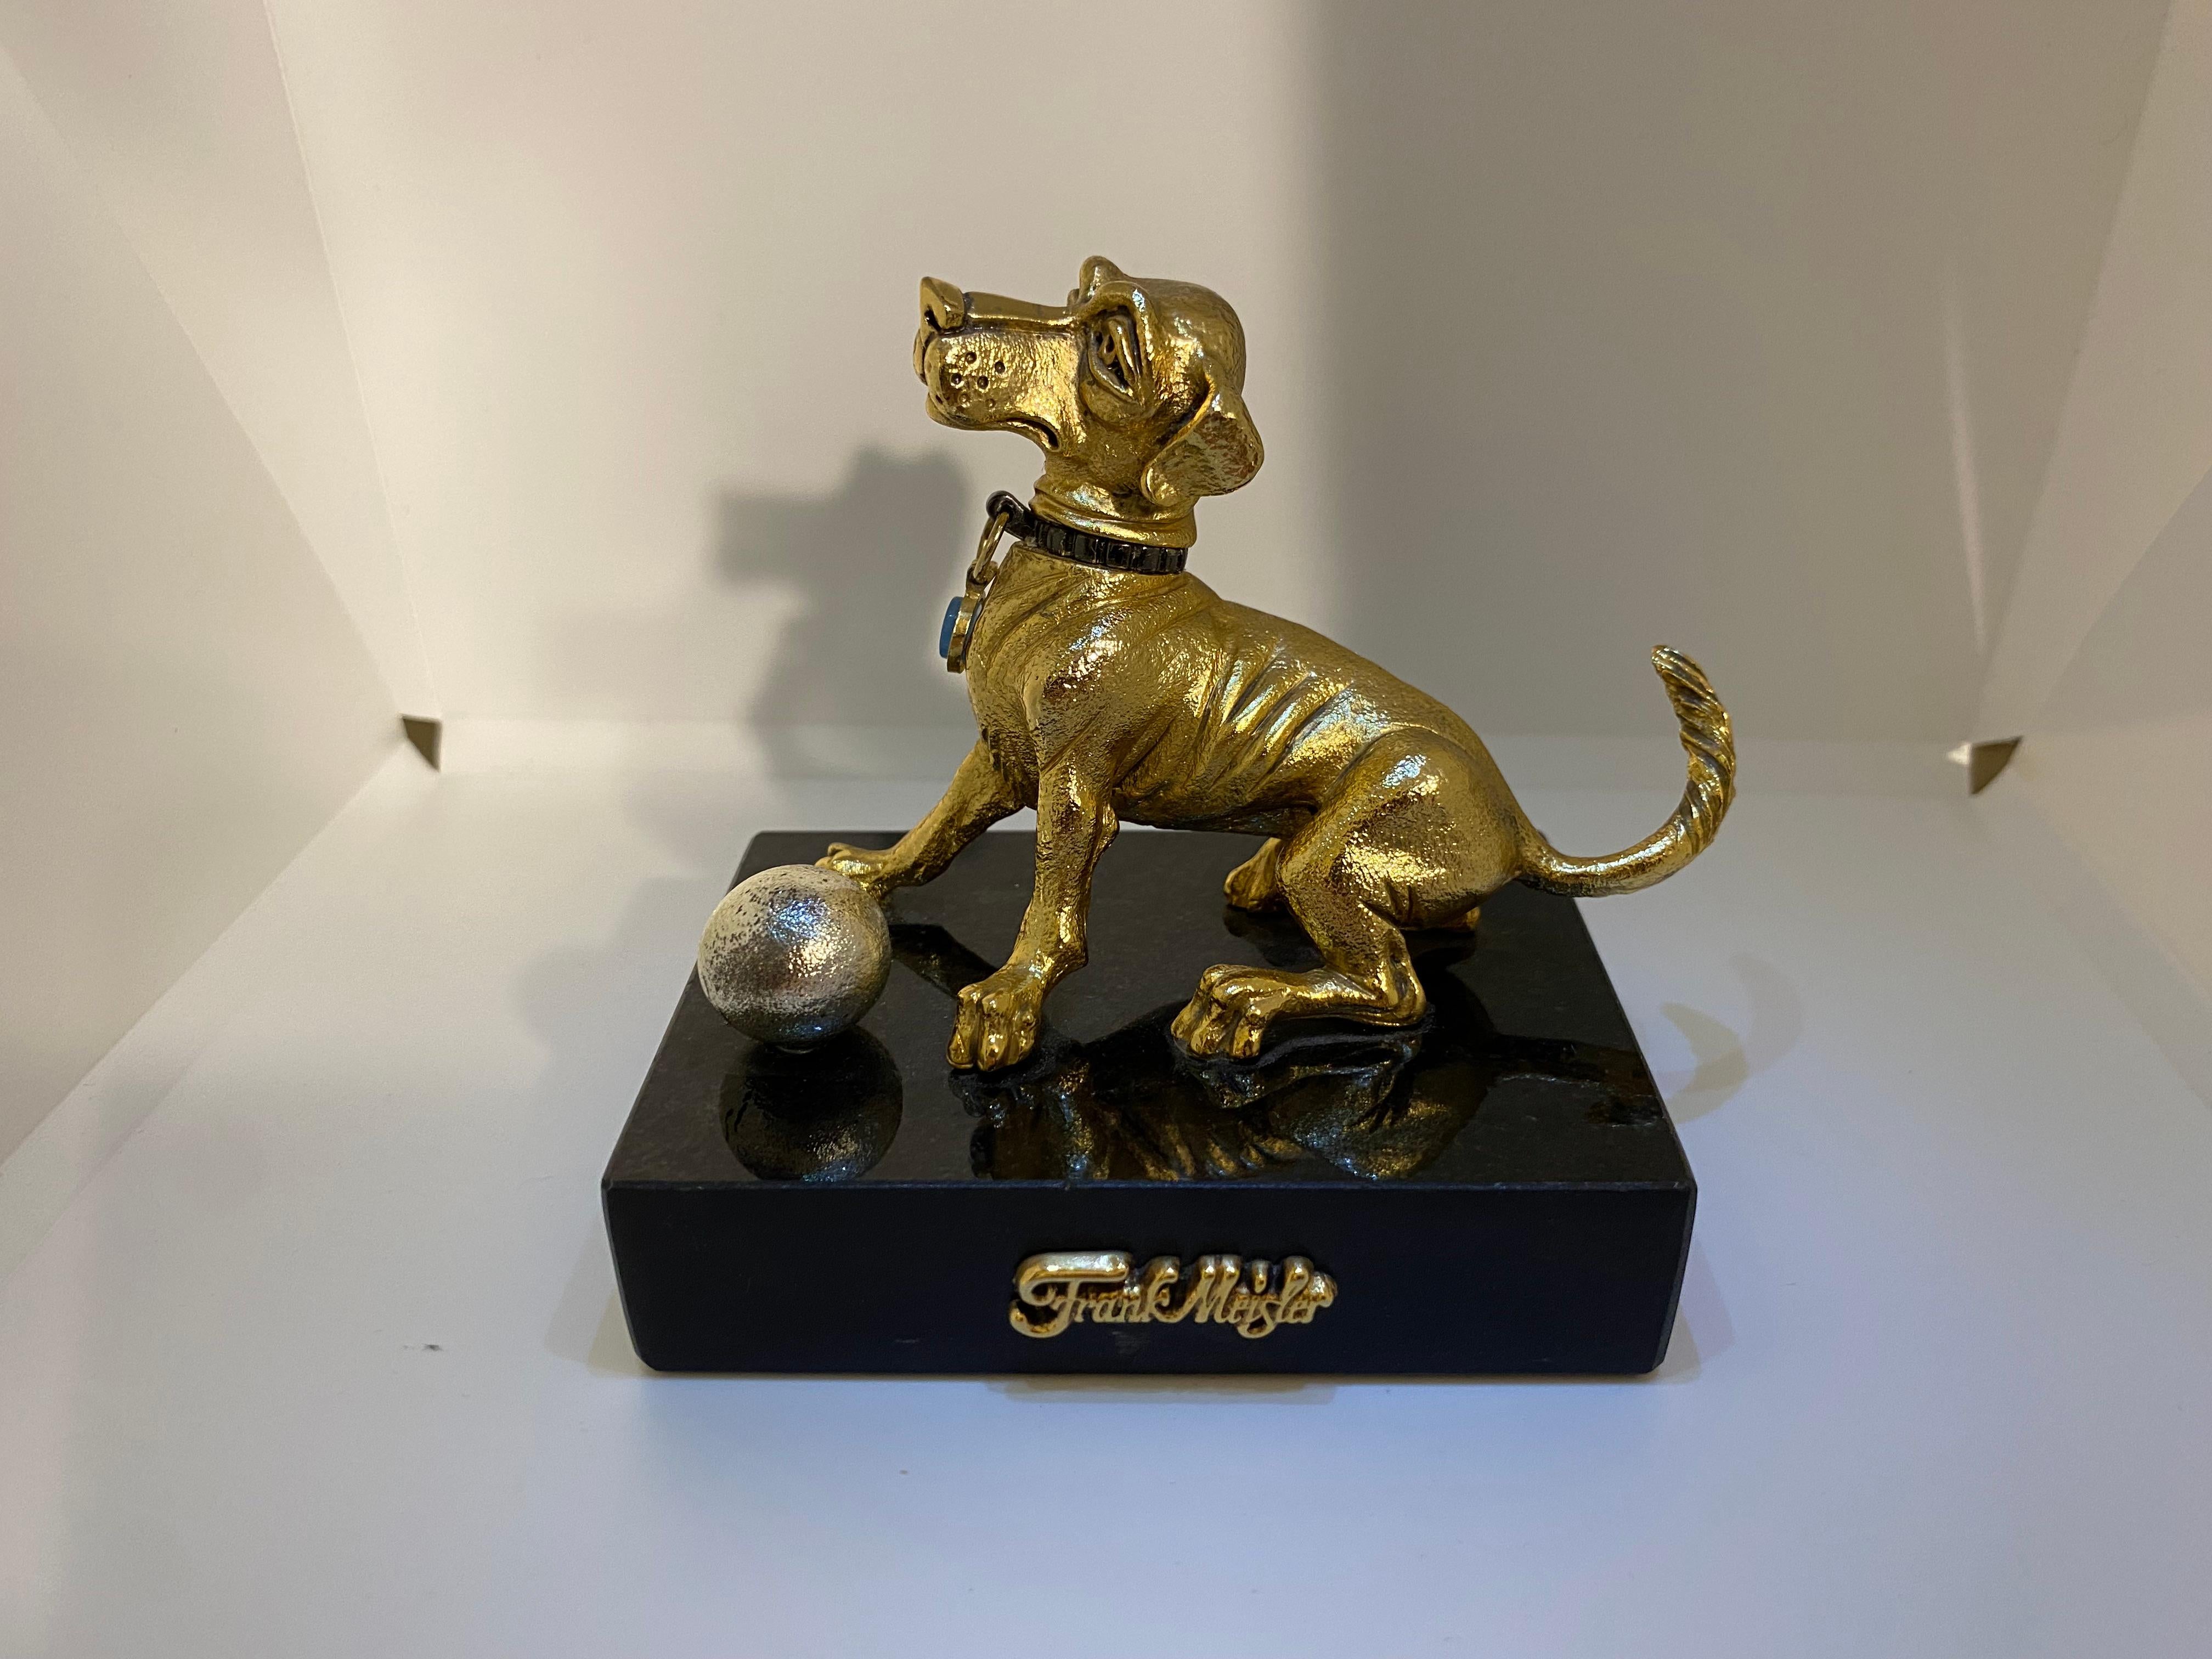 FRANK MEISLER MINI GOLD DOG
H9 x W9 x L6 cm – 560g
The dog is sitting with a ball. The dog’s head turns sideways. Handmade. Limited Edition. Metal Alloys with gold and silver plated elements. 